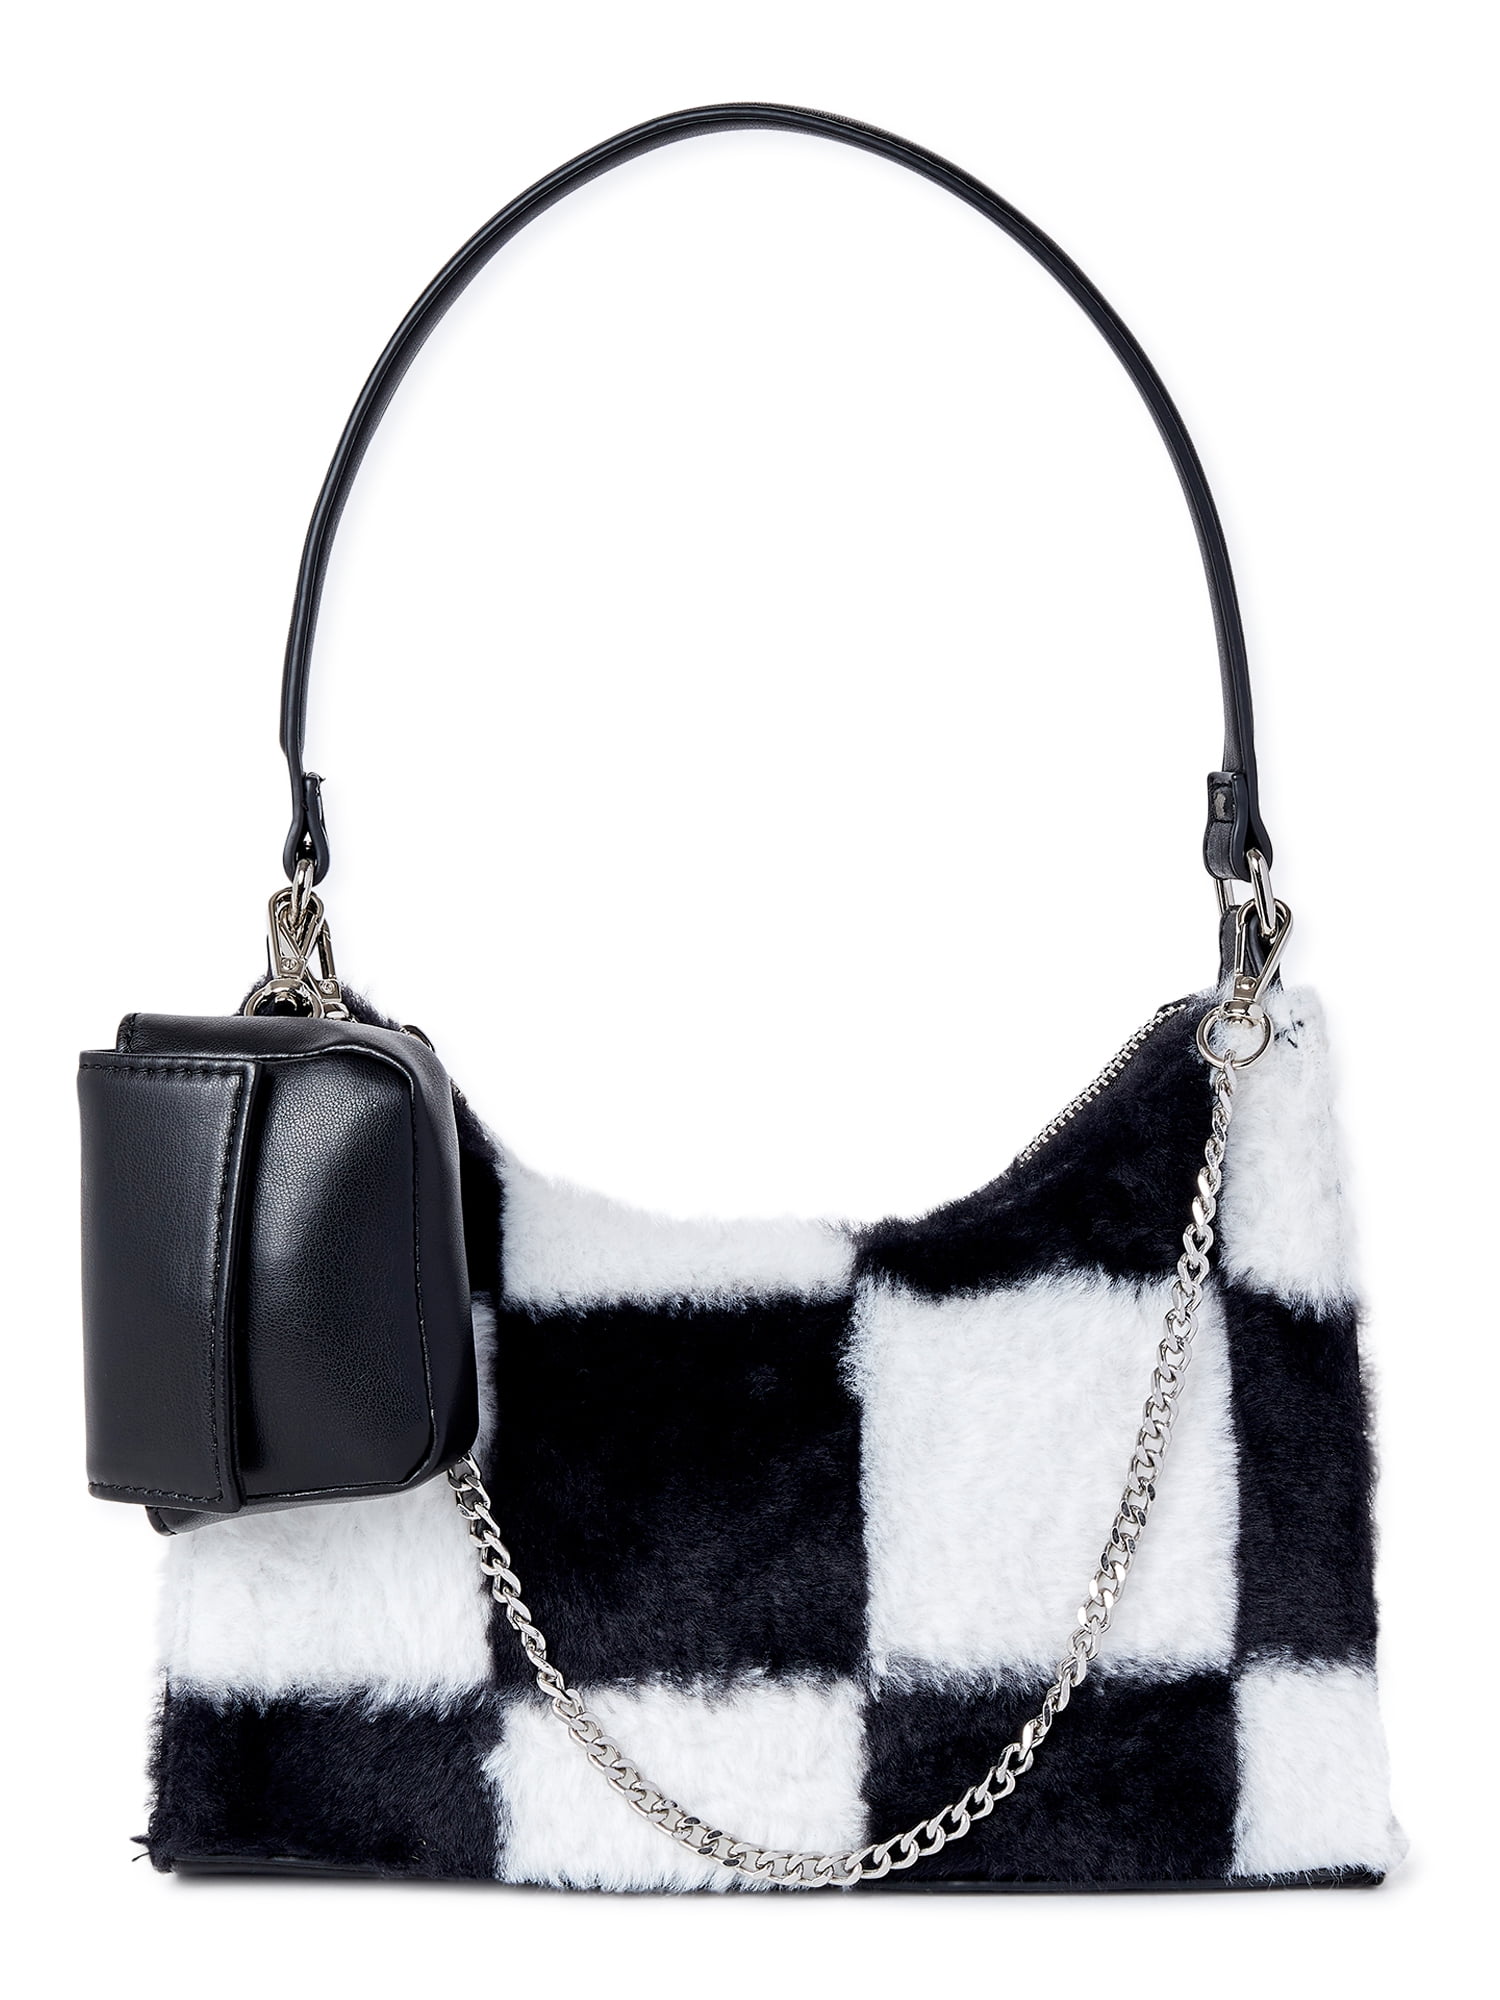 Madden NYC Women's Faux Fur Checkered Shoulder Bag